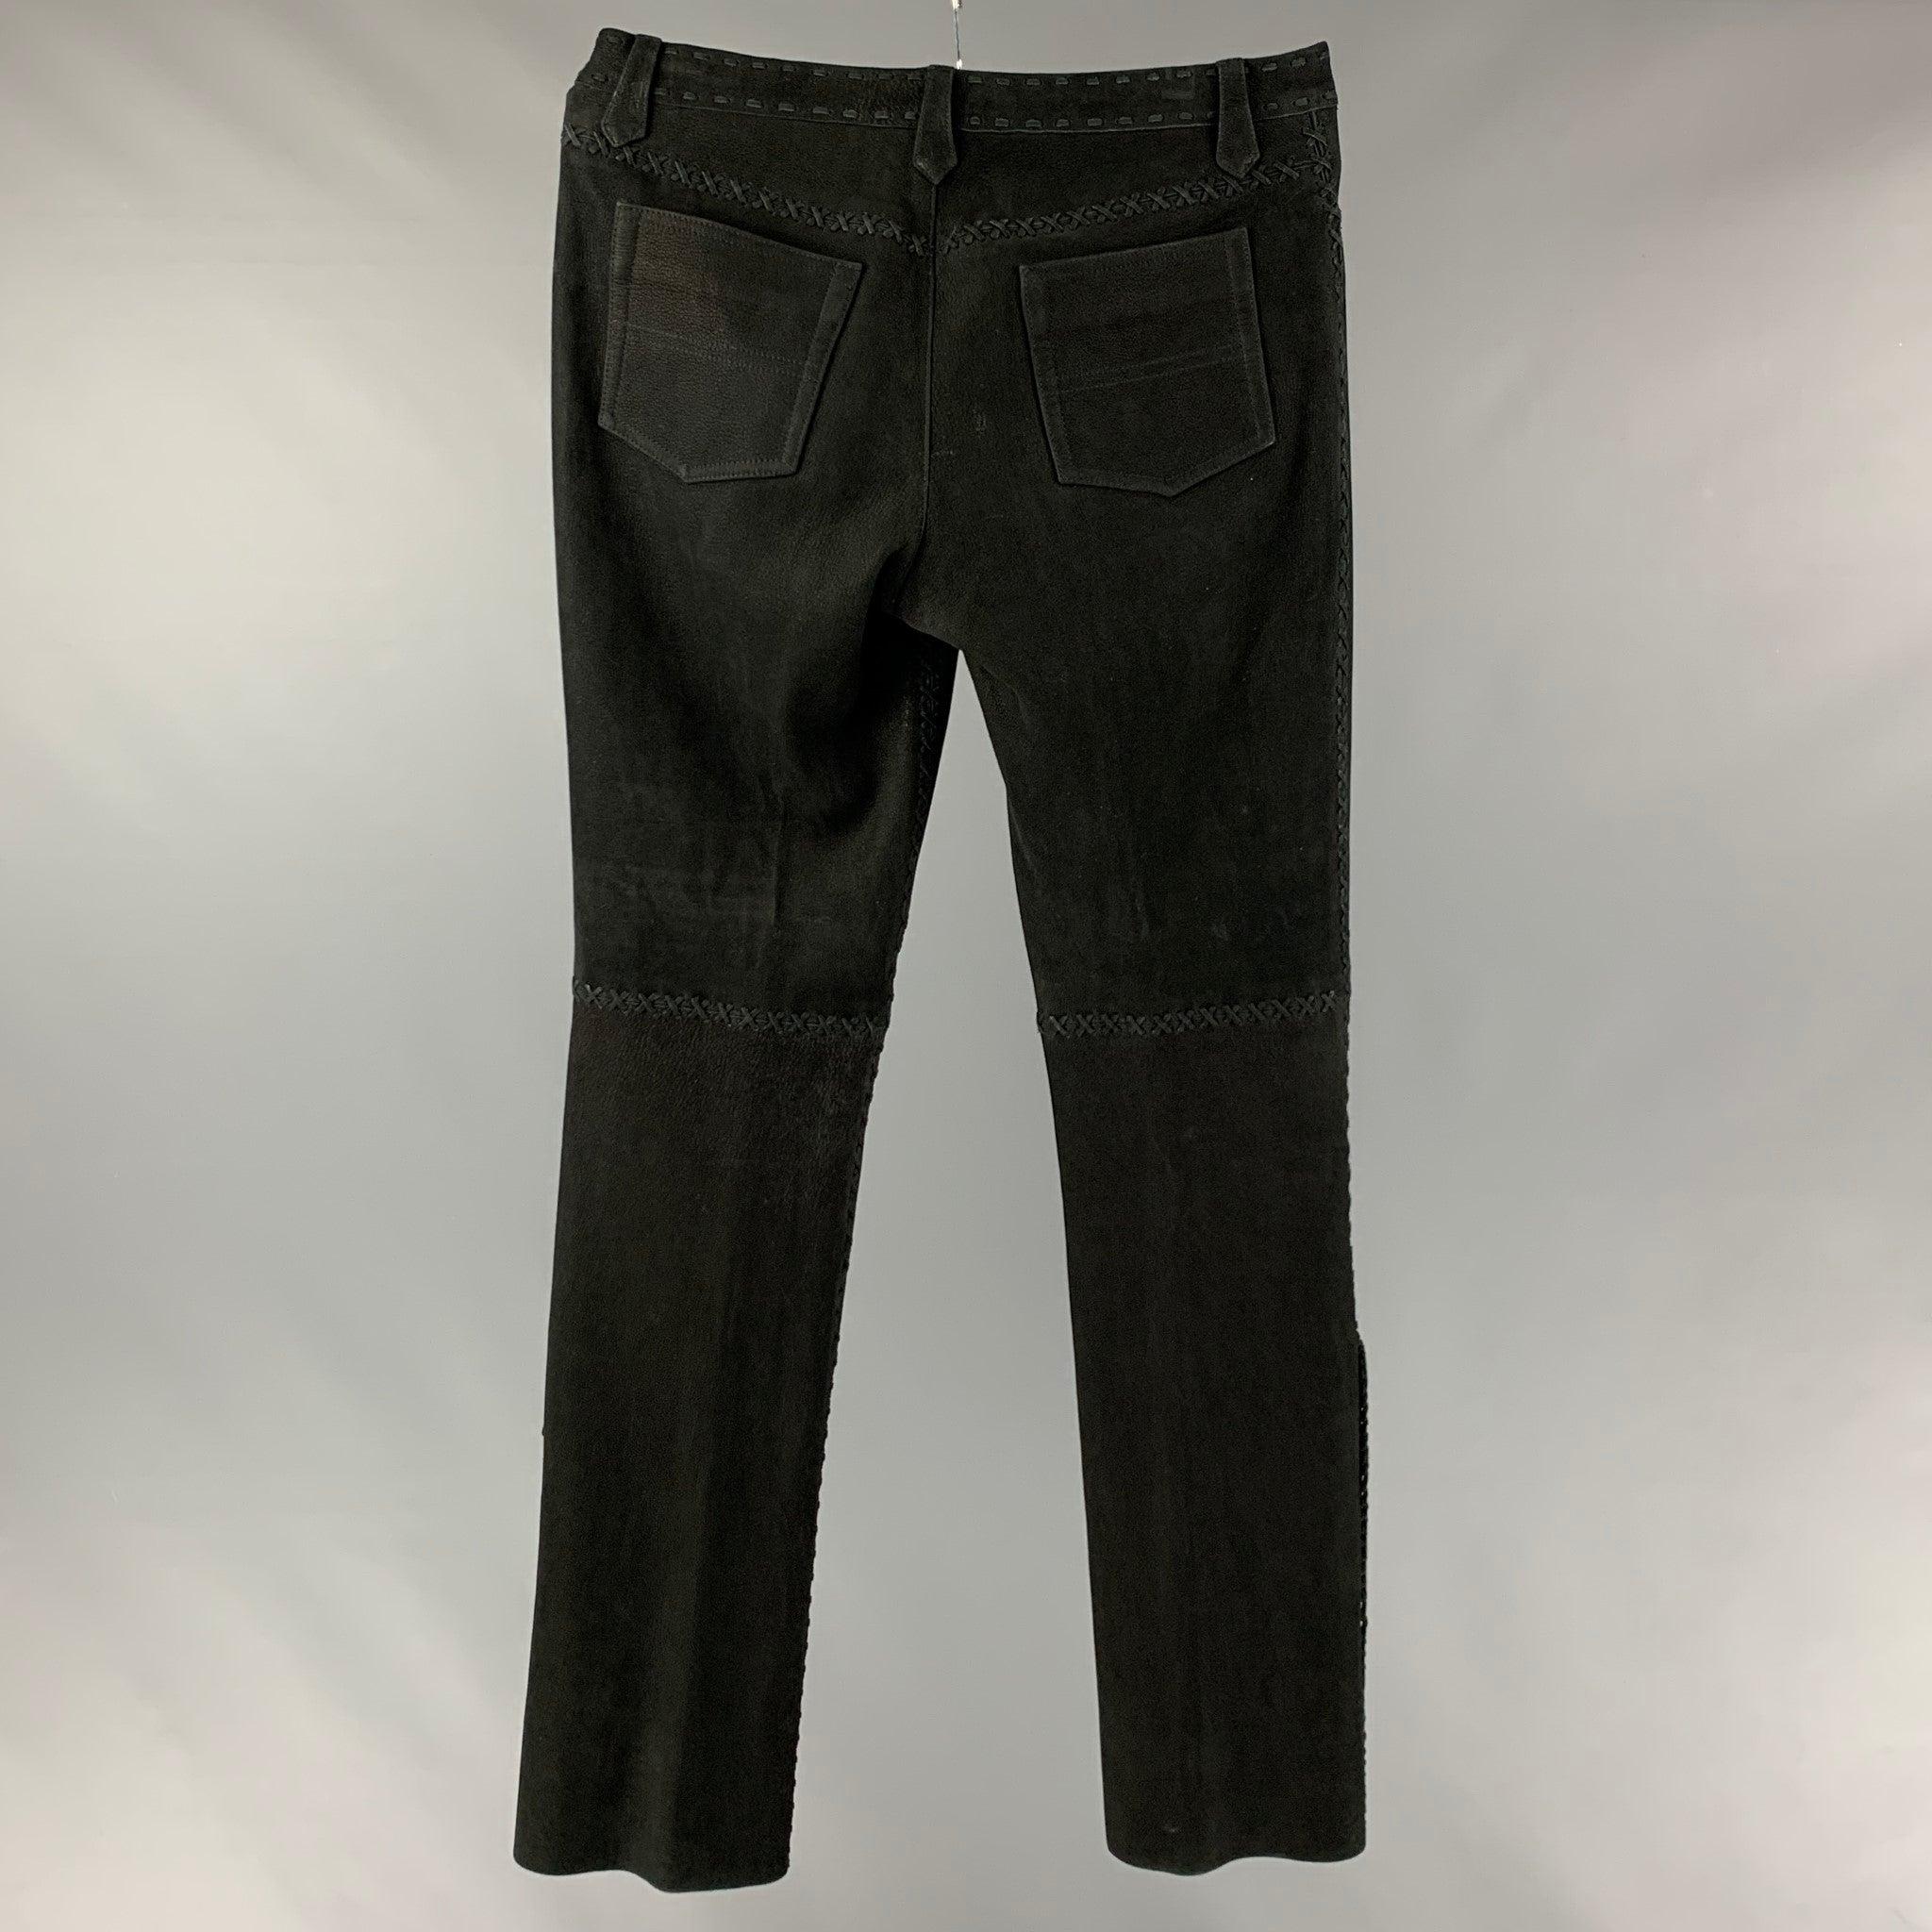 RALPH LAUREN COLLECTION by casual pants comes in a black suede featuring a western style, top stitching, concho detail, and a zip fly closure. Excellent Pre-Owned Condition. 

Marked:   no size marked 

Measurements: 
  Waist: 34 inches Rise: 10